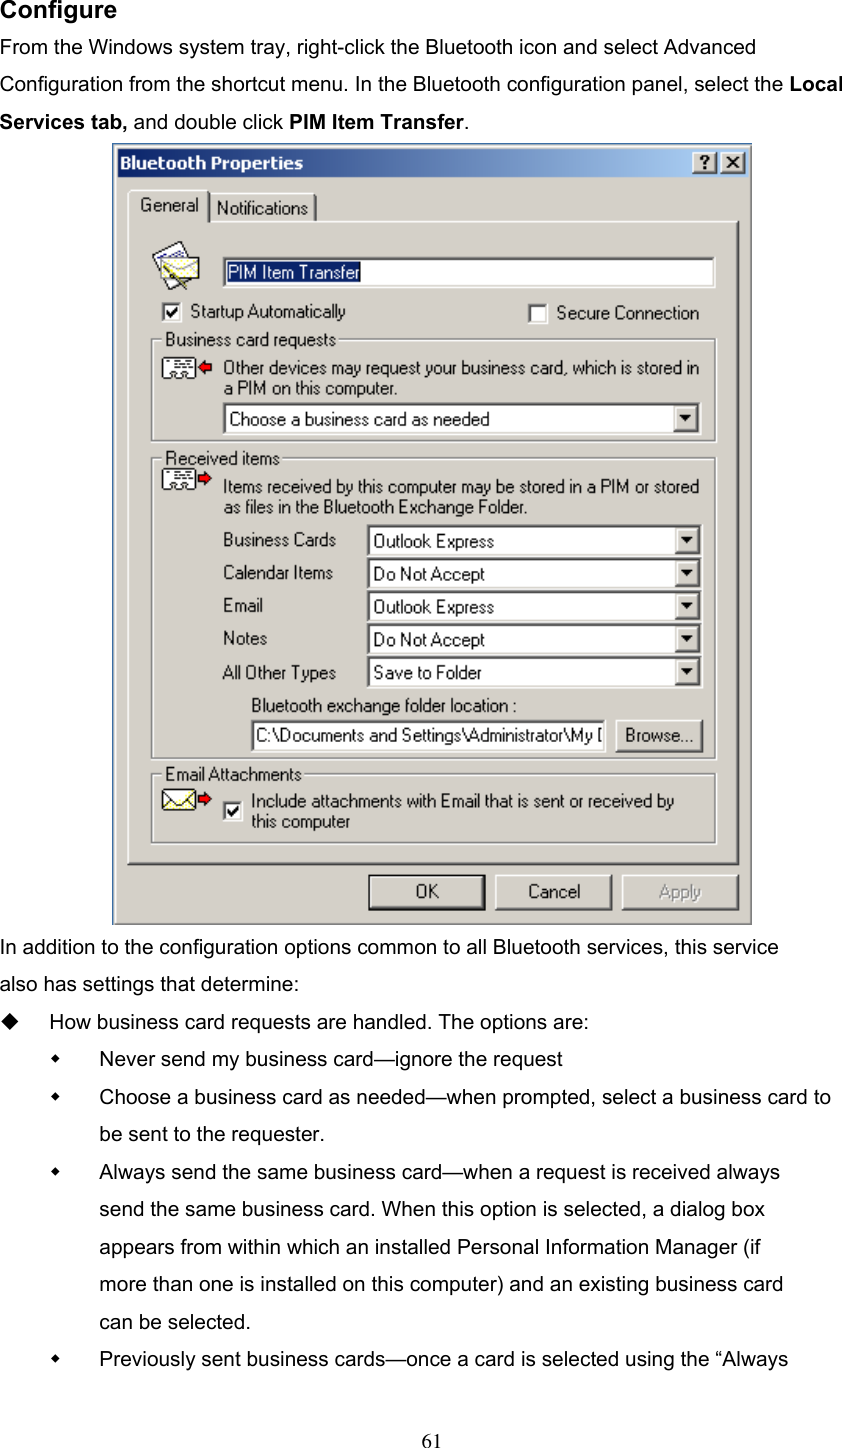  Configure From the Windows system tray, right-click the Bluetooth icon and select Advanced Configuration from the shortcut menu. In the Bluetooth configuration panel, select the Local Services tab, and double click PIM Item Transfer.  In addition to the configuration options common to all Bluetooth services, this service also has settings that determine:   How business card requests are handled. The options are:   Never send my business card—ignore the request   Choose a business card as needed—when prompted, select a business card to be sent to the requester.   Always send the same business card—when a request is received always send the same business card. When this option is selected, a dialog box appears from within which an installed Personal Information Manager (if more than one is installed on this computer) and an existing business card can be selected.   Previously sent business cards—once a card is selected using the “Always  61 